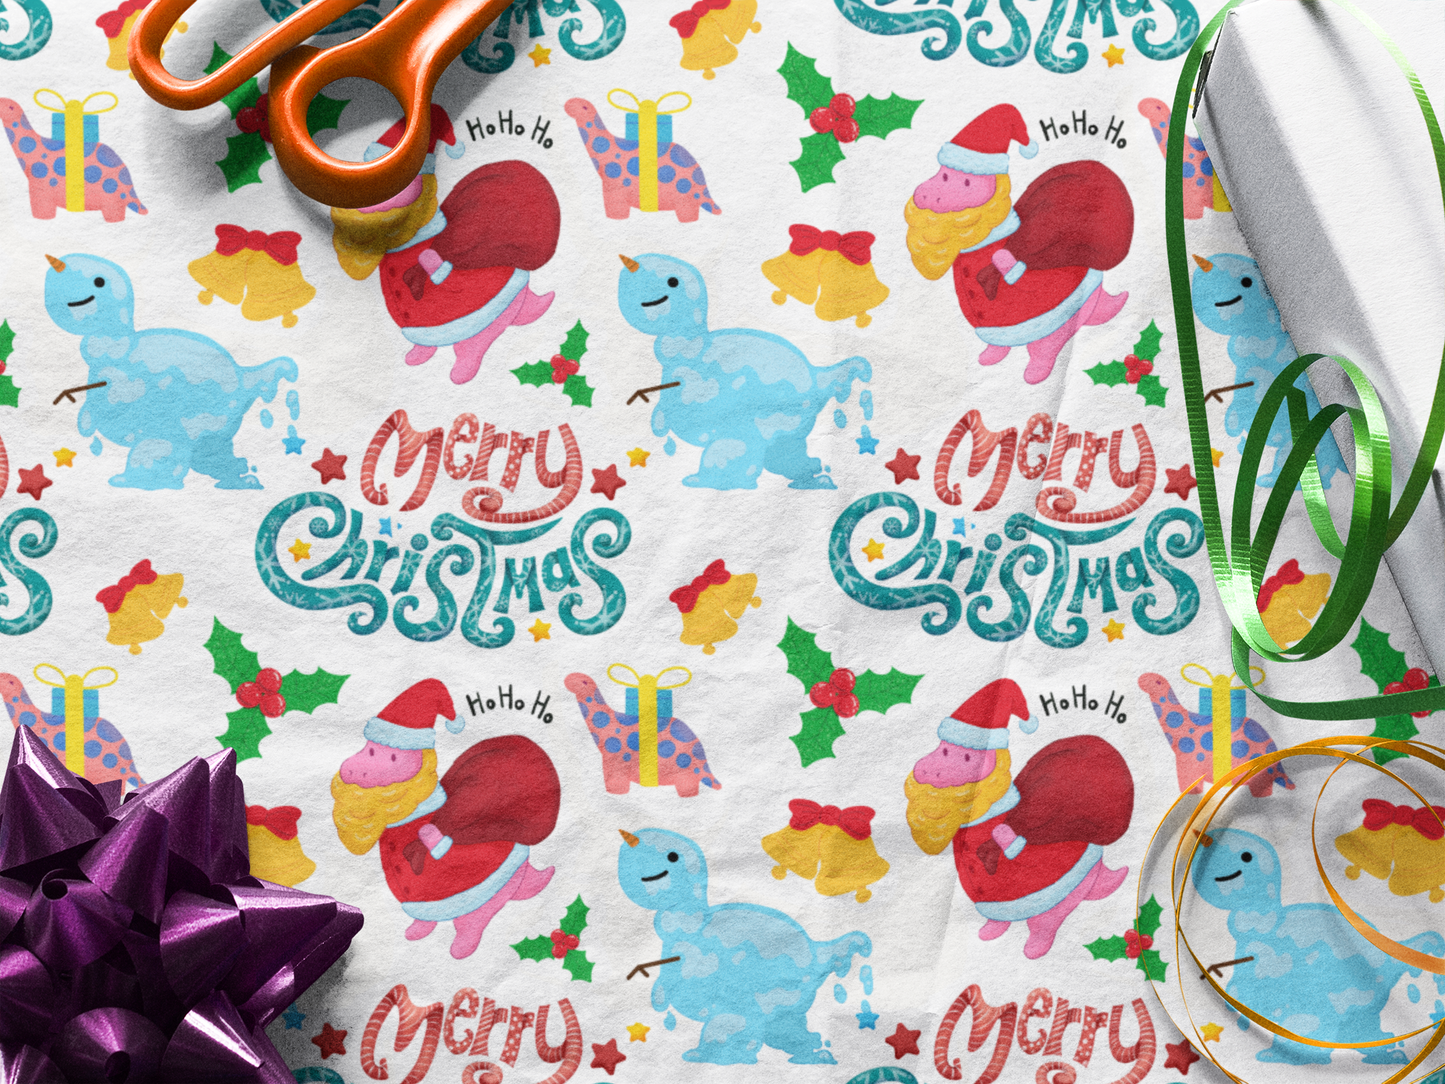 Dinosaur Christmas Wrapping Paper Roll Holiday Gift Wrap Cute Dinosaur Wrapping Paper 6 Foot Roll Gift Wrapping Paper